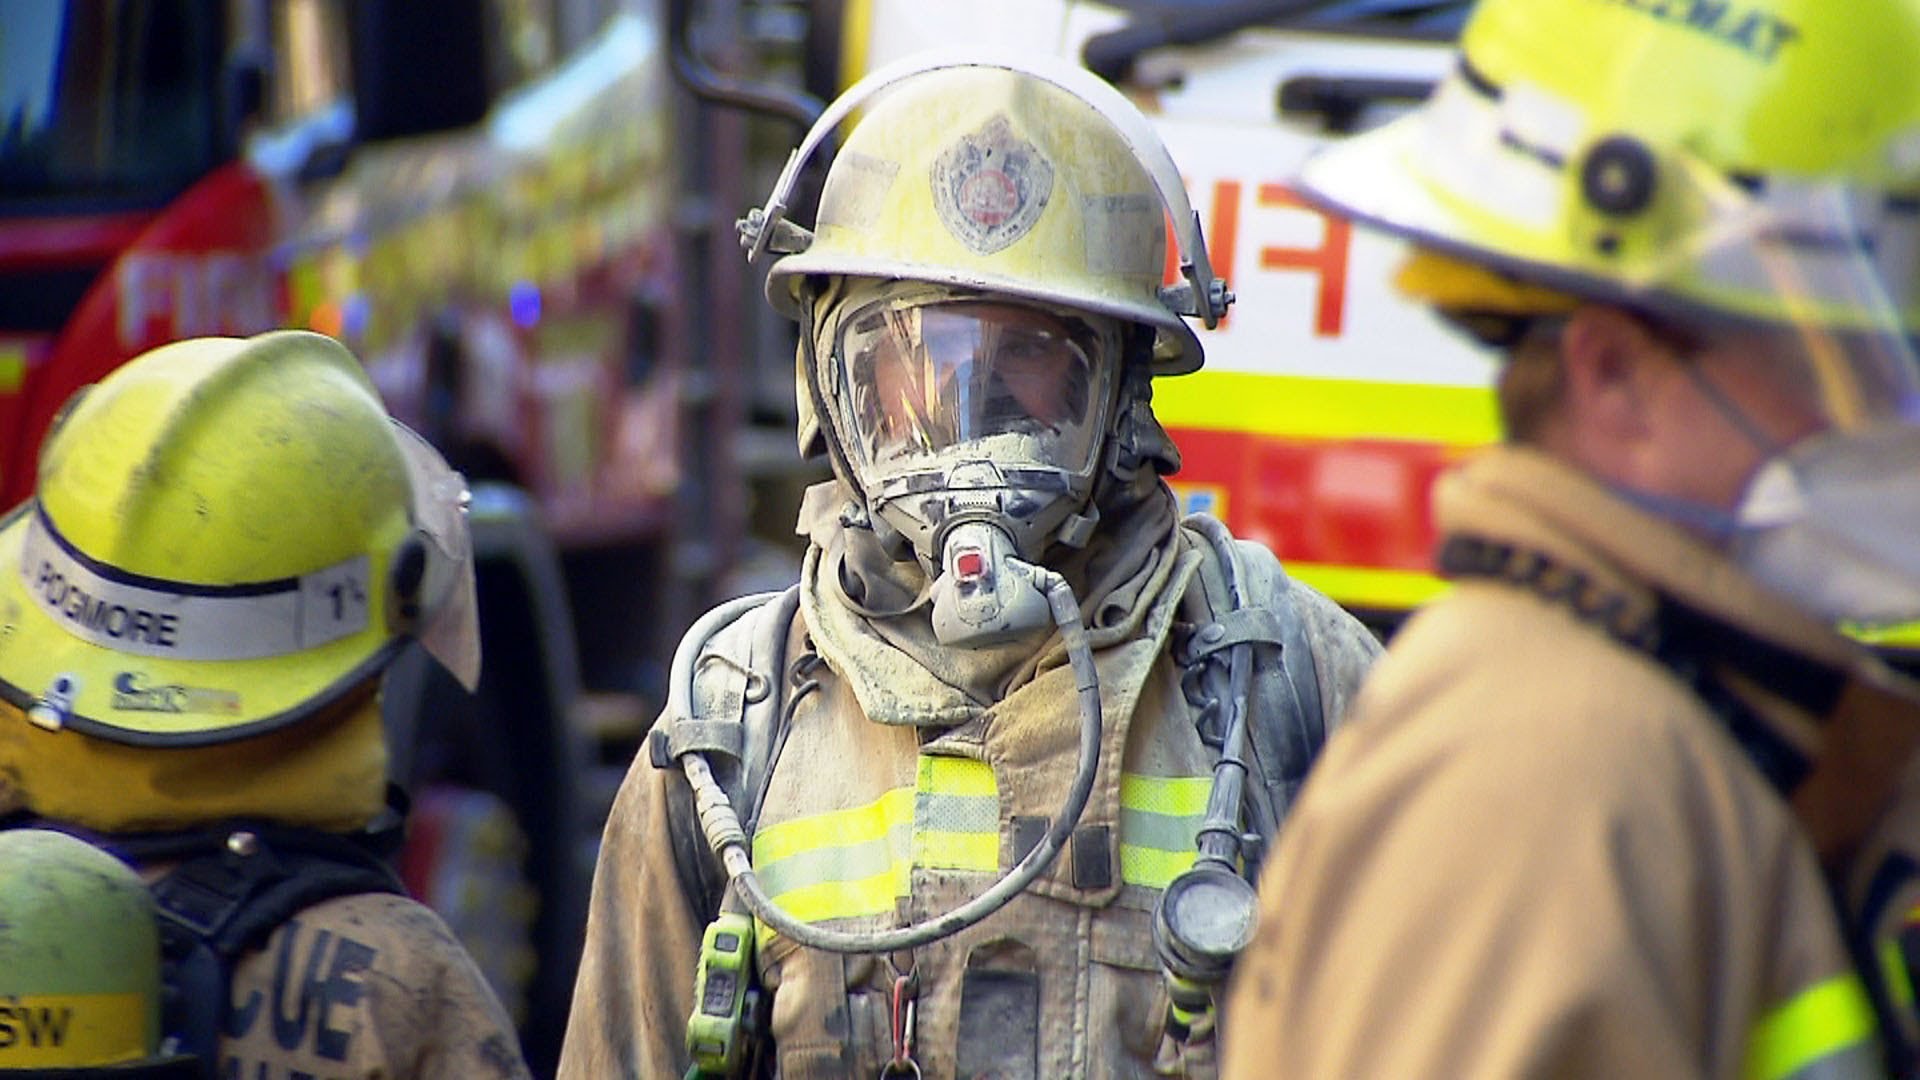 Over 100 fire fighters battle electrical fire in Sydney CBD - YouTube